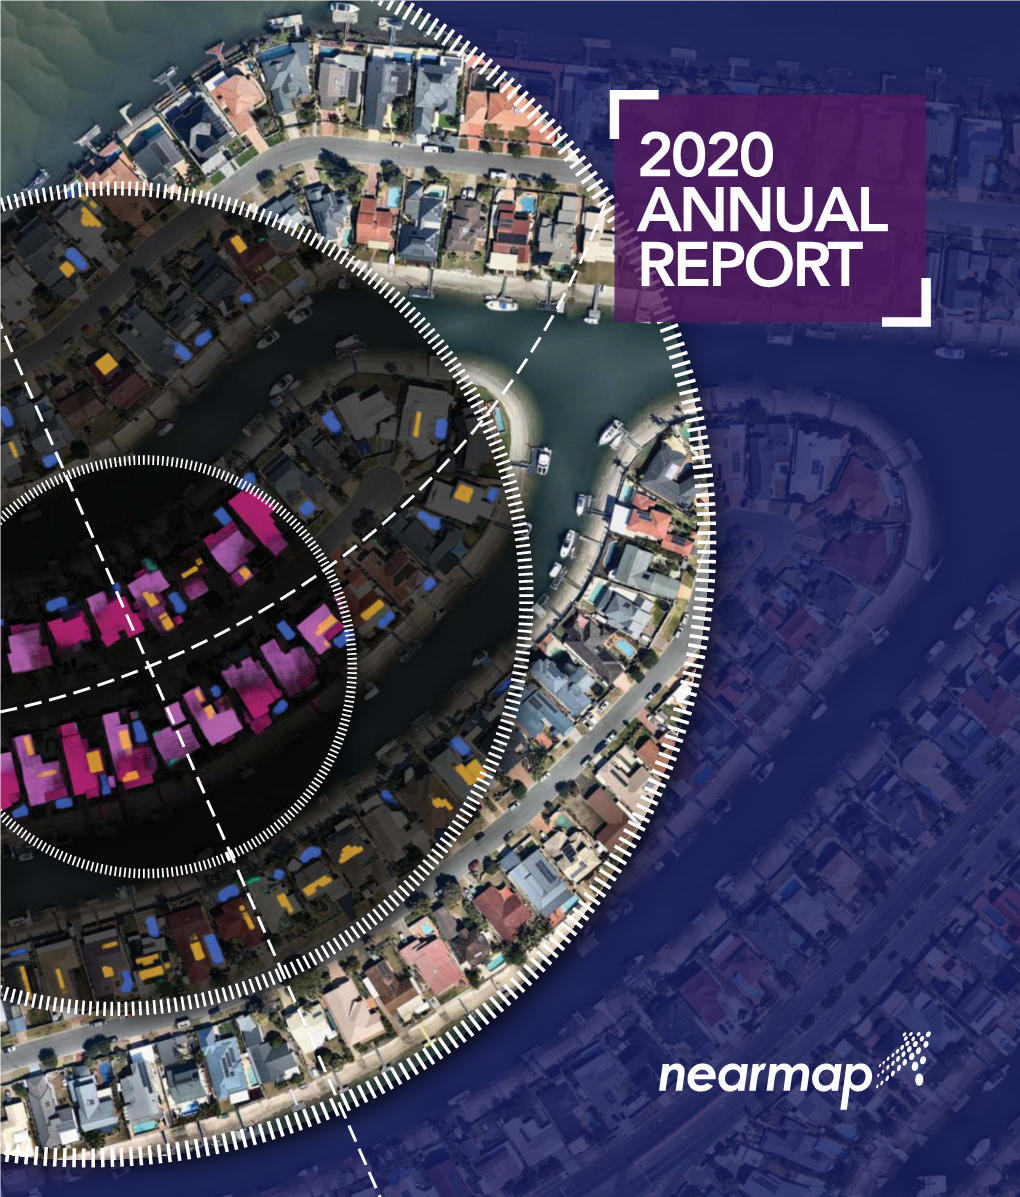 2020 Annual Report About Nearmap